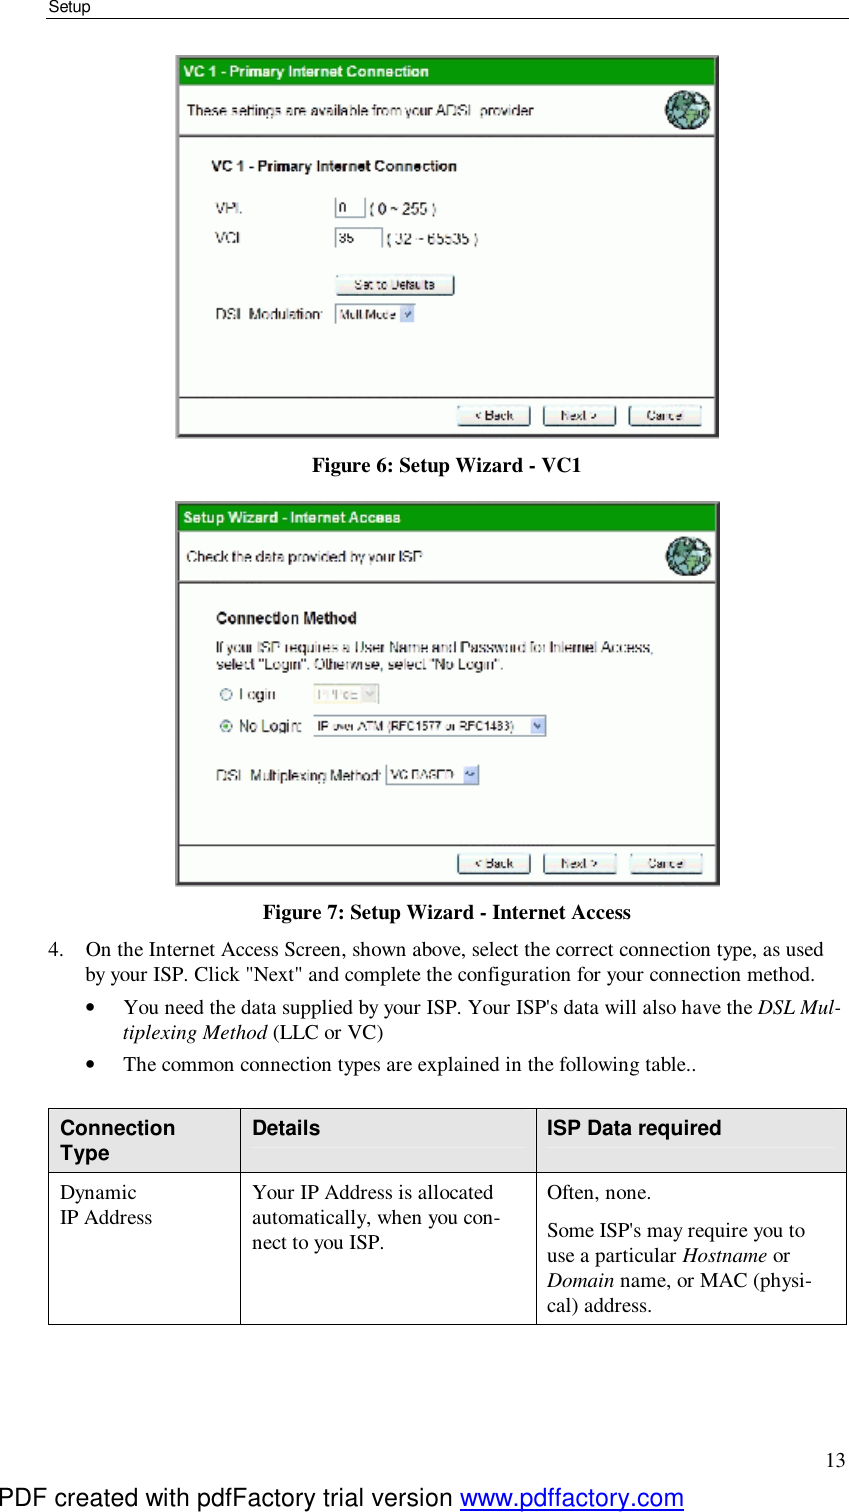 Setup 13  Figure 6: Setup Wizard - VC1  Figure 7: Setup Wizard - Internet Access 4. On the Internet Access Screen, shown above, select the correct connection type, as used by your ISP. Click &quot;Next&quot; and complete the configuration for your connection method. •  You need the data supplied by your ISP. Your ISP&apos;s data will also have the DSL Mul-tiplexing Method (LLC or VC) •  The common connection types are explained in the following table..  Connection Type  Details  ISP Data required Dynamic IP Address  Your IP Address is allocated automatically, when you con-nect to you ISP. Often, none. Some ISP&apos;s may require you to use a particular Hostname or Domain name, or MAC (physi-cal) address. PDF created with pdfFactory trial version www.pdffactory.com